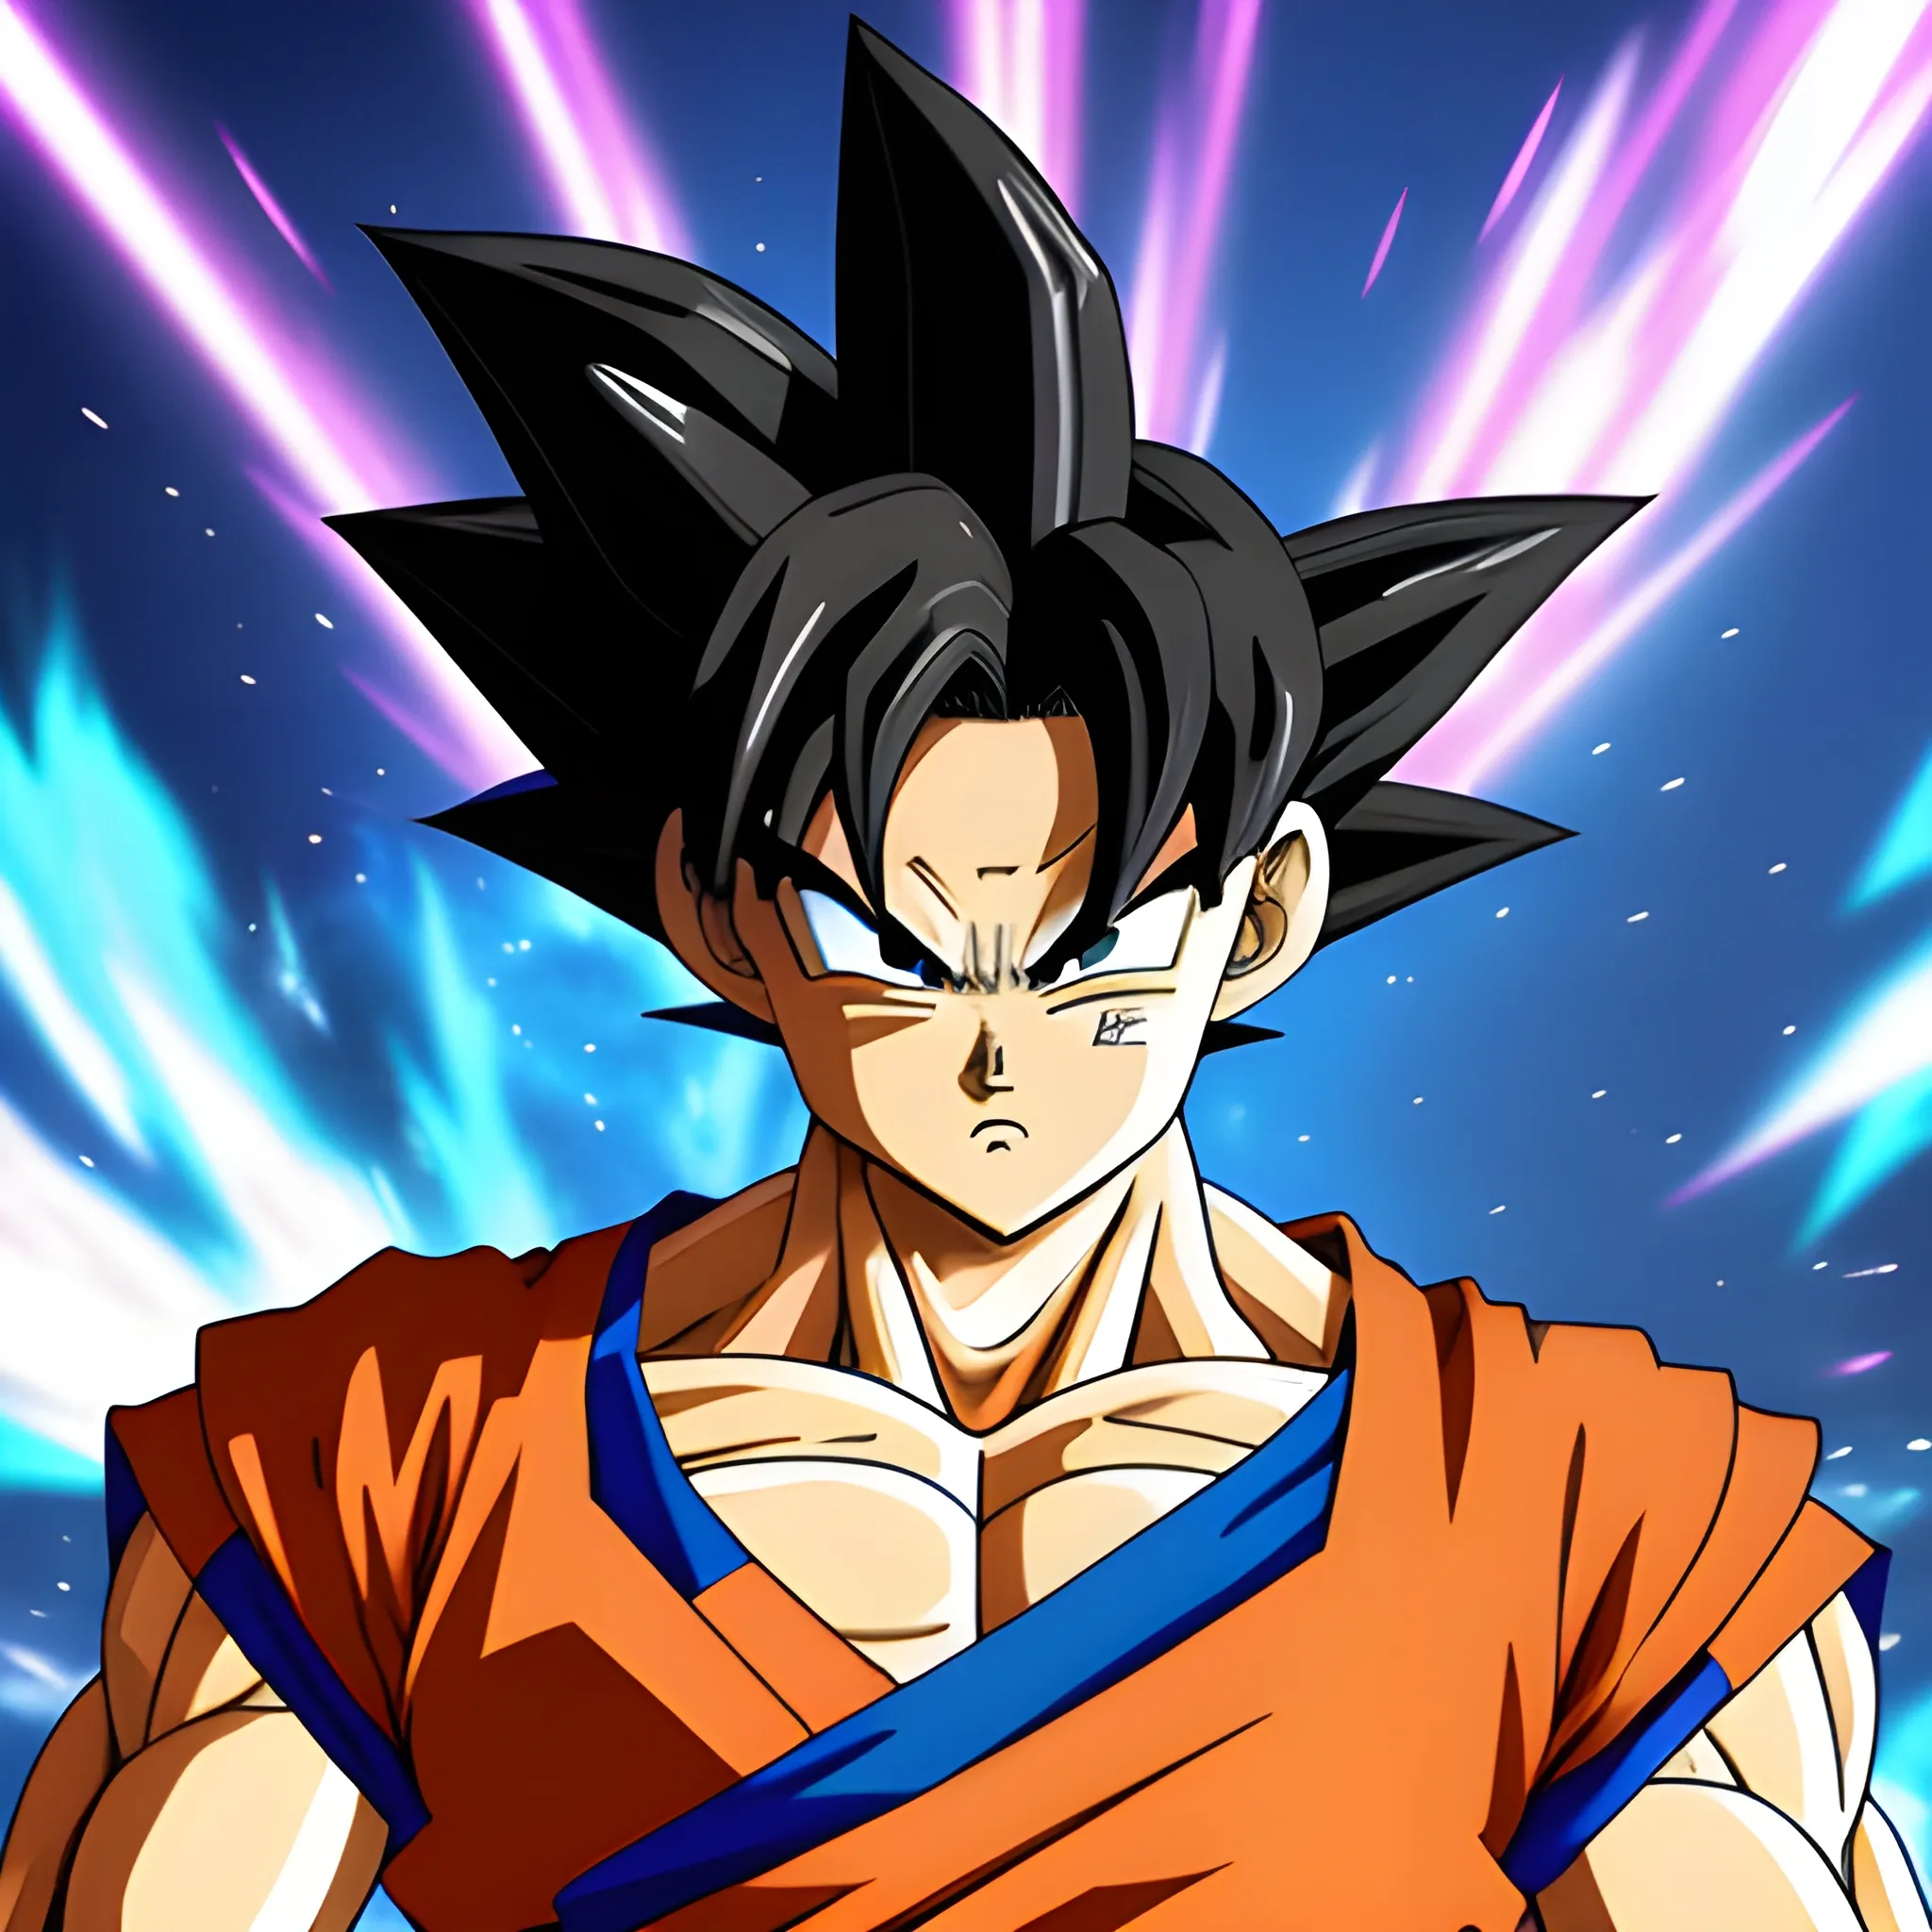 Goku stands in a fighting stance, with an intense, concentrated ...